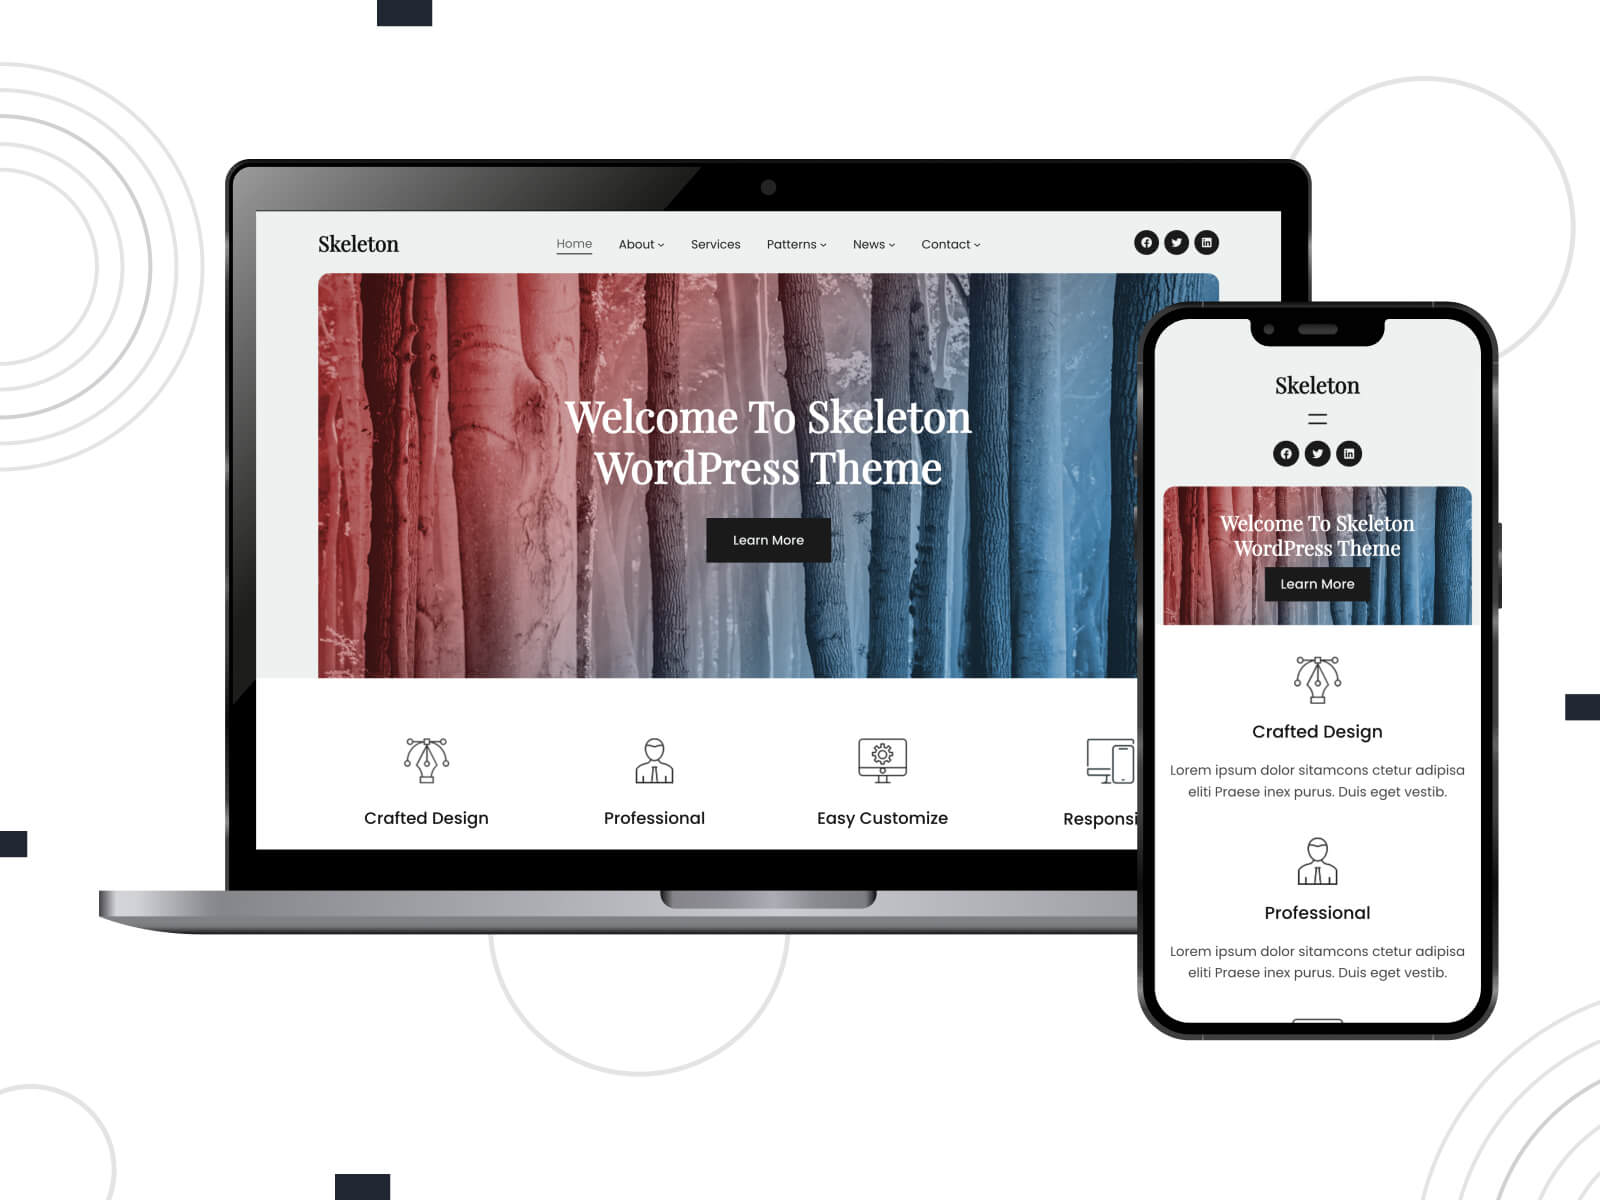 Picture of Skeleton - bright, rich, with a focus on high-resolution graphics, this theme is acclaimed for its visual appeal among multipurpose WordPress themes in maroon, gray, and cadet blue color mix.